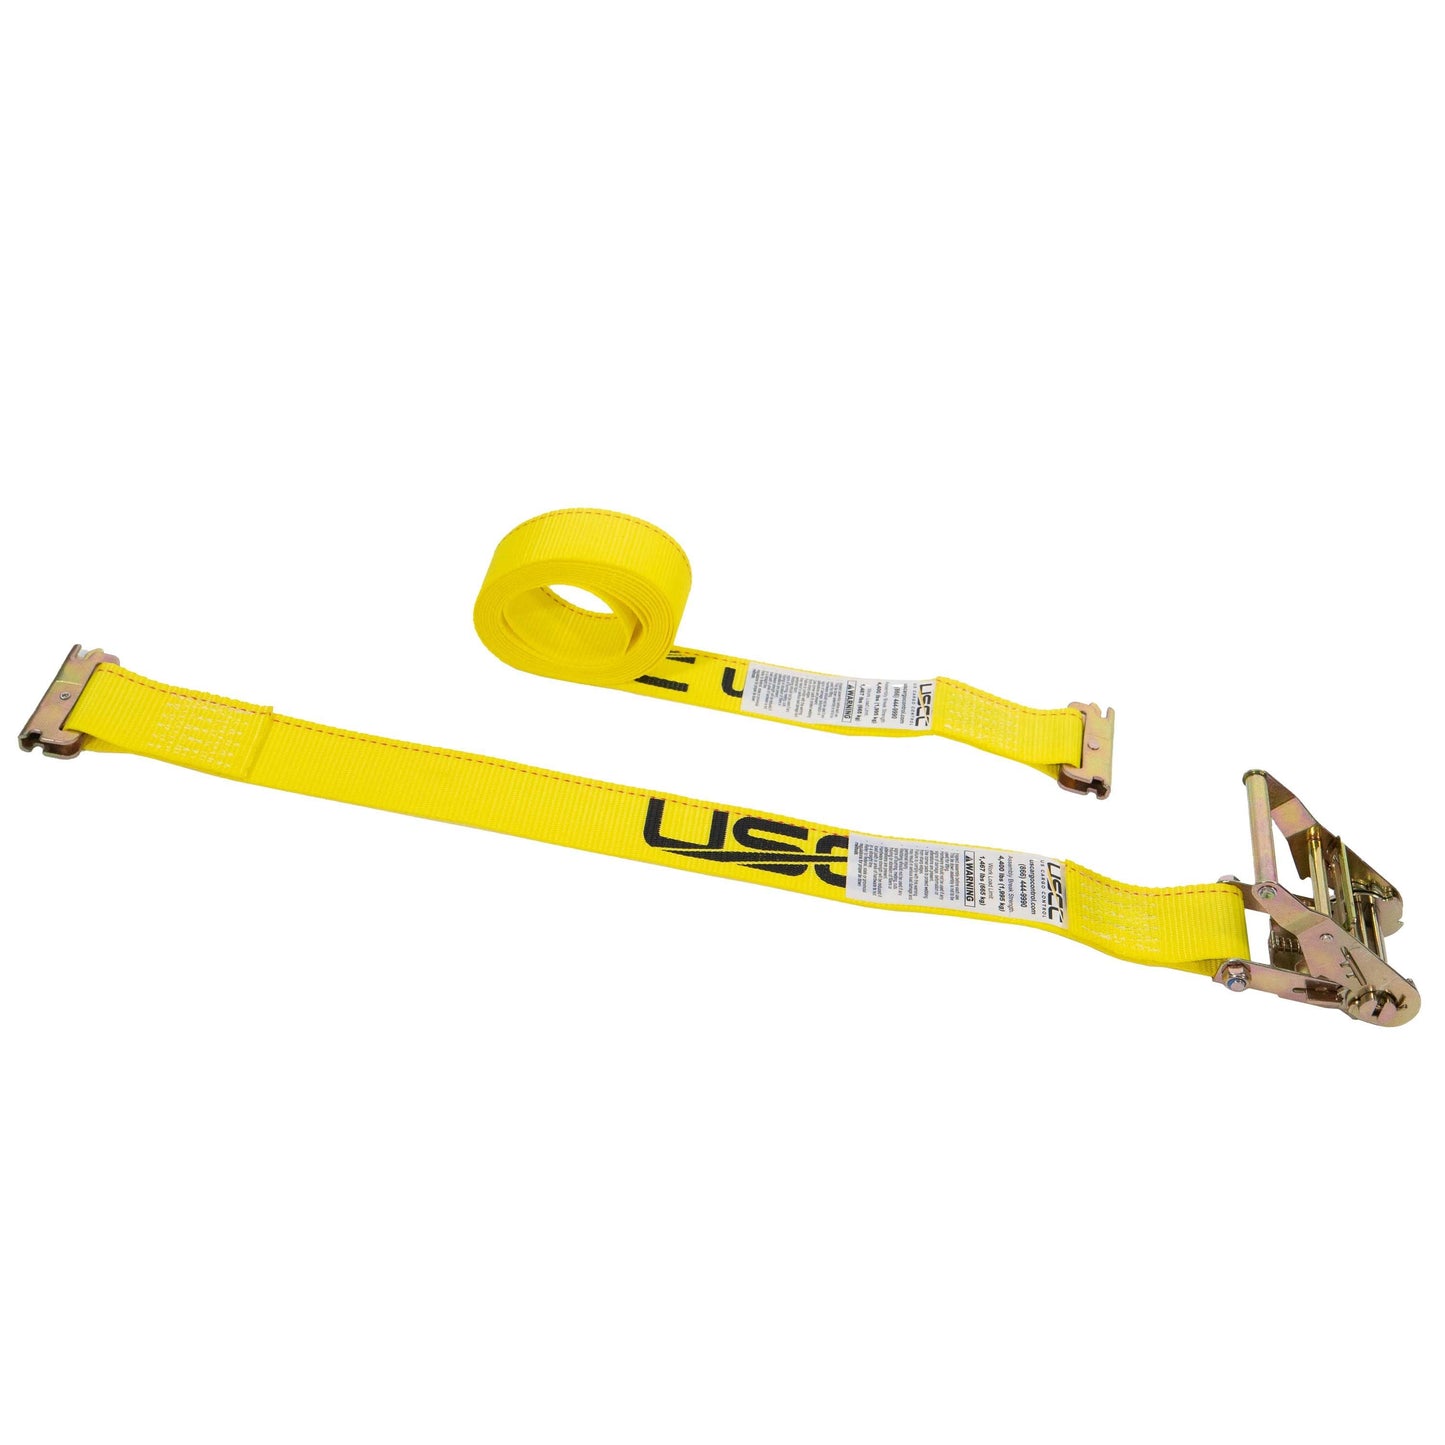  yellow 12'  E track ratchet strap with 2' fixed end